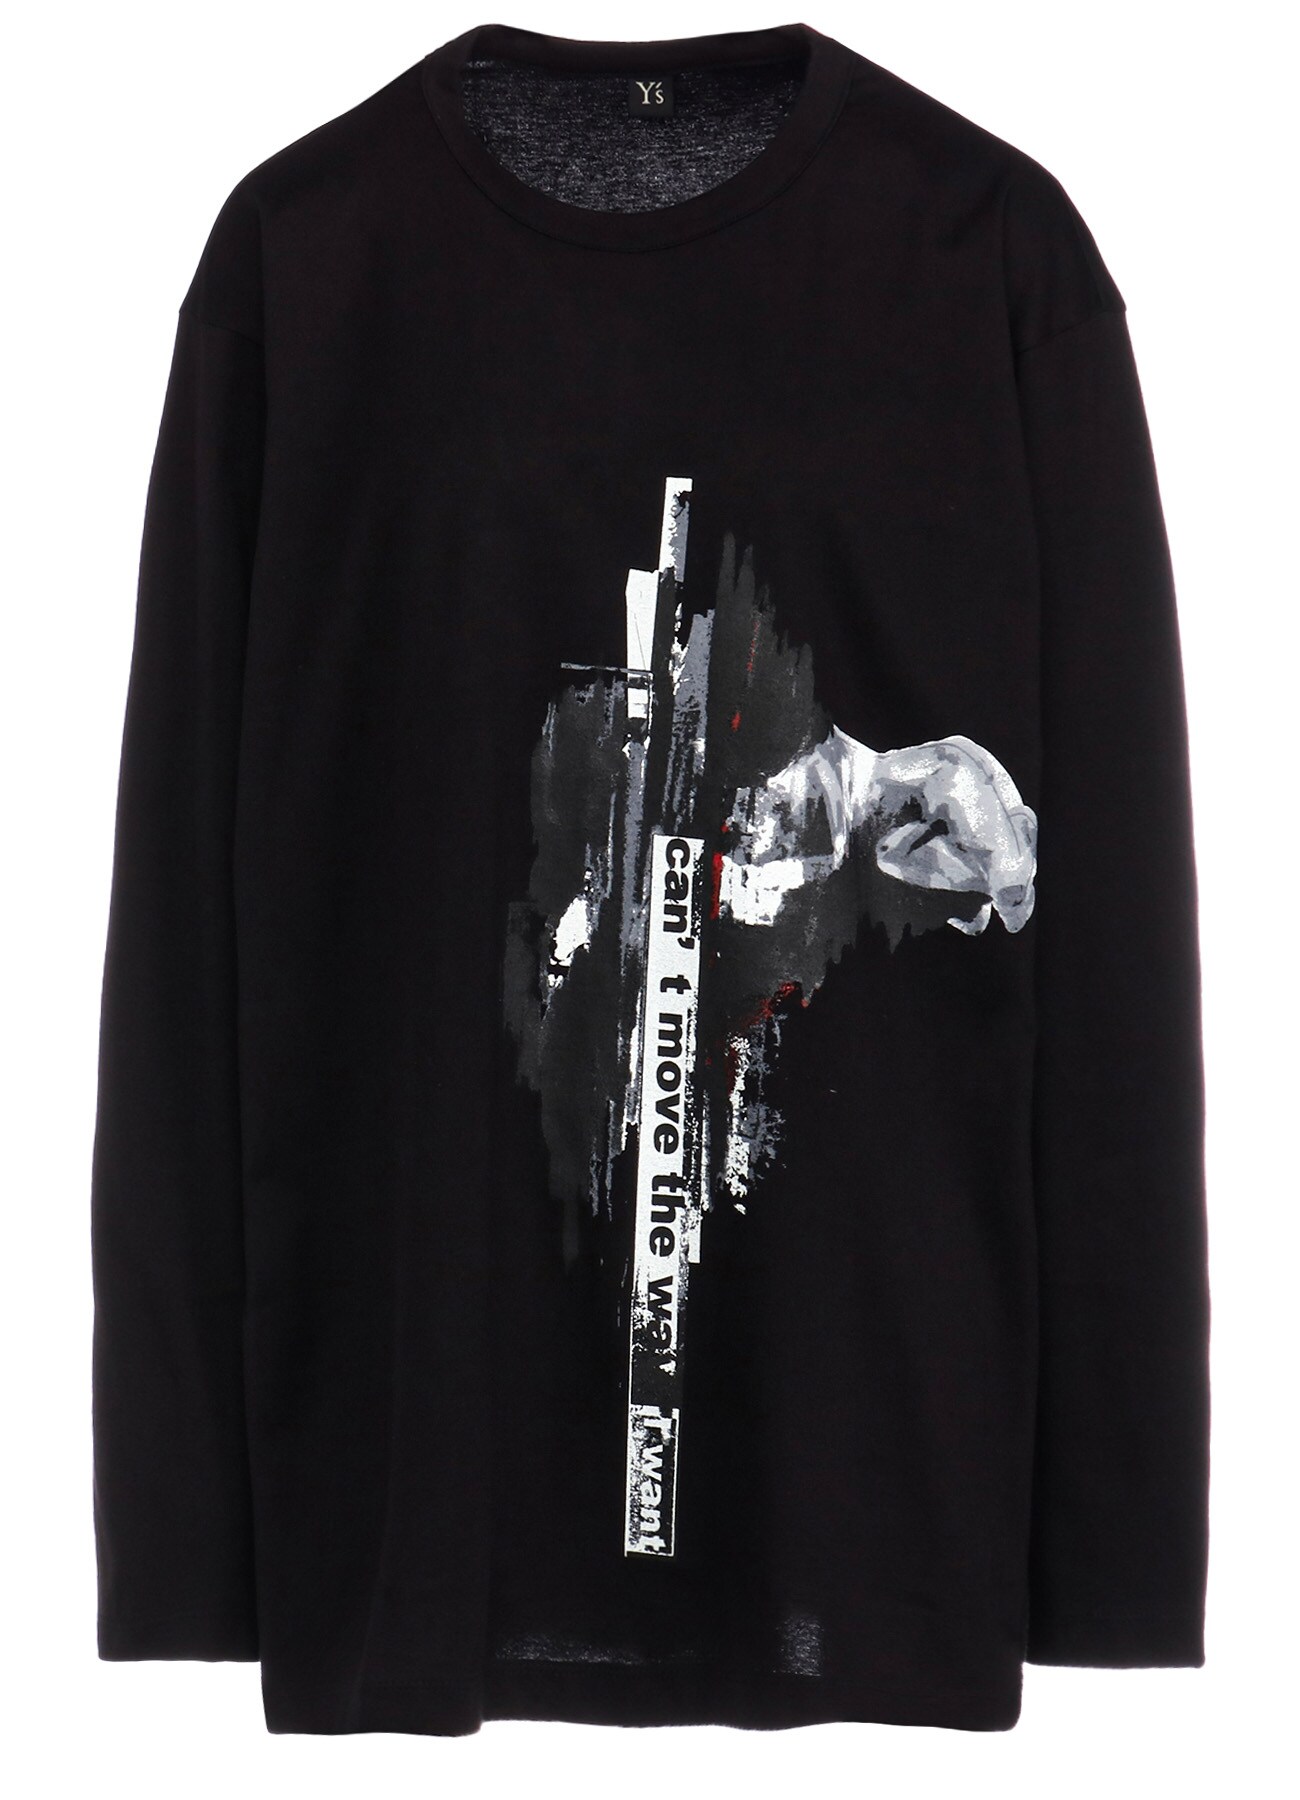 【7/26 12:00(JTS) Release】MESSAGE + FEMALE PRINT ROUND NECK LONG SLEEVE T